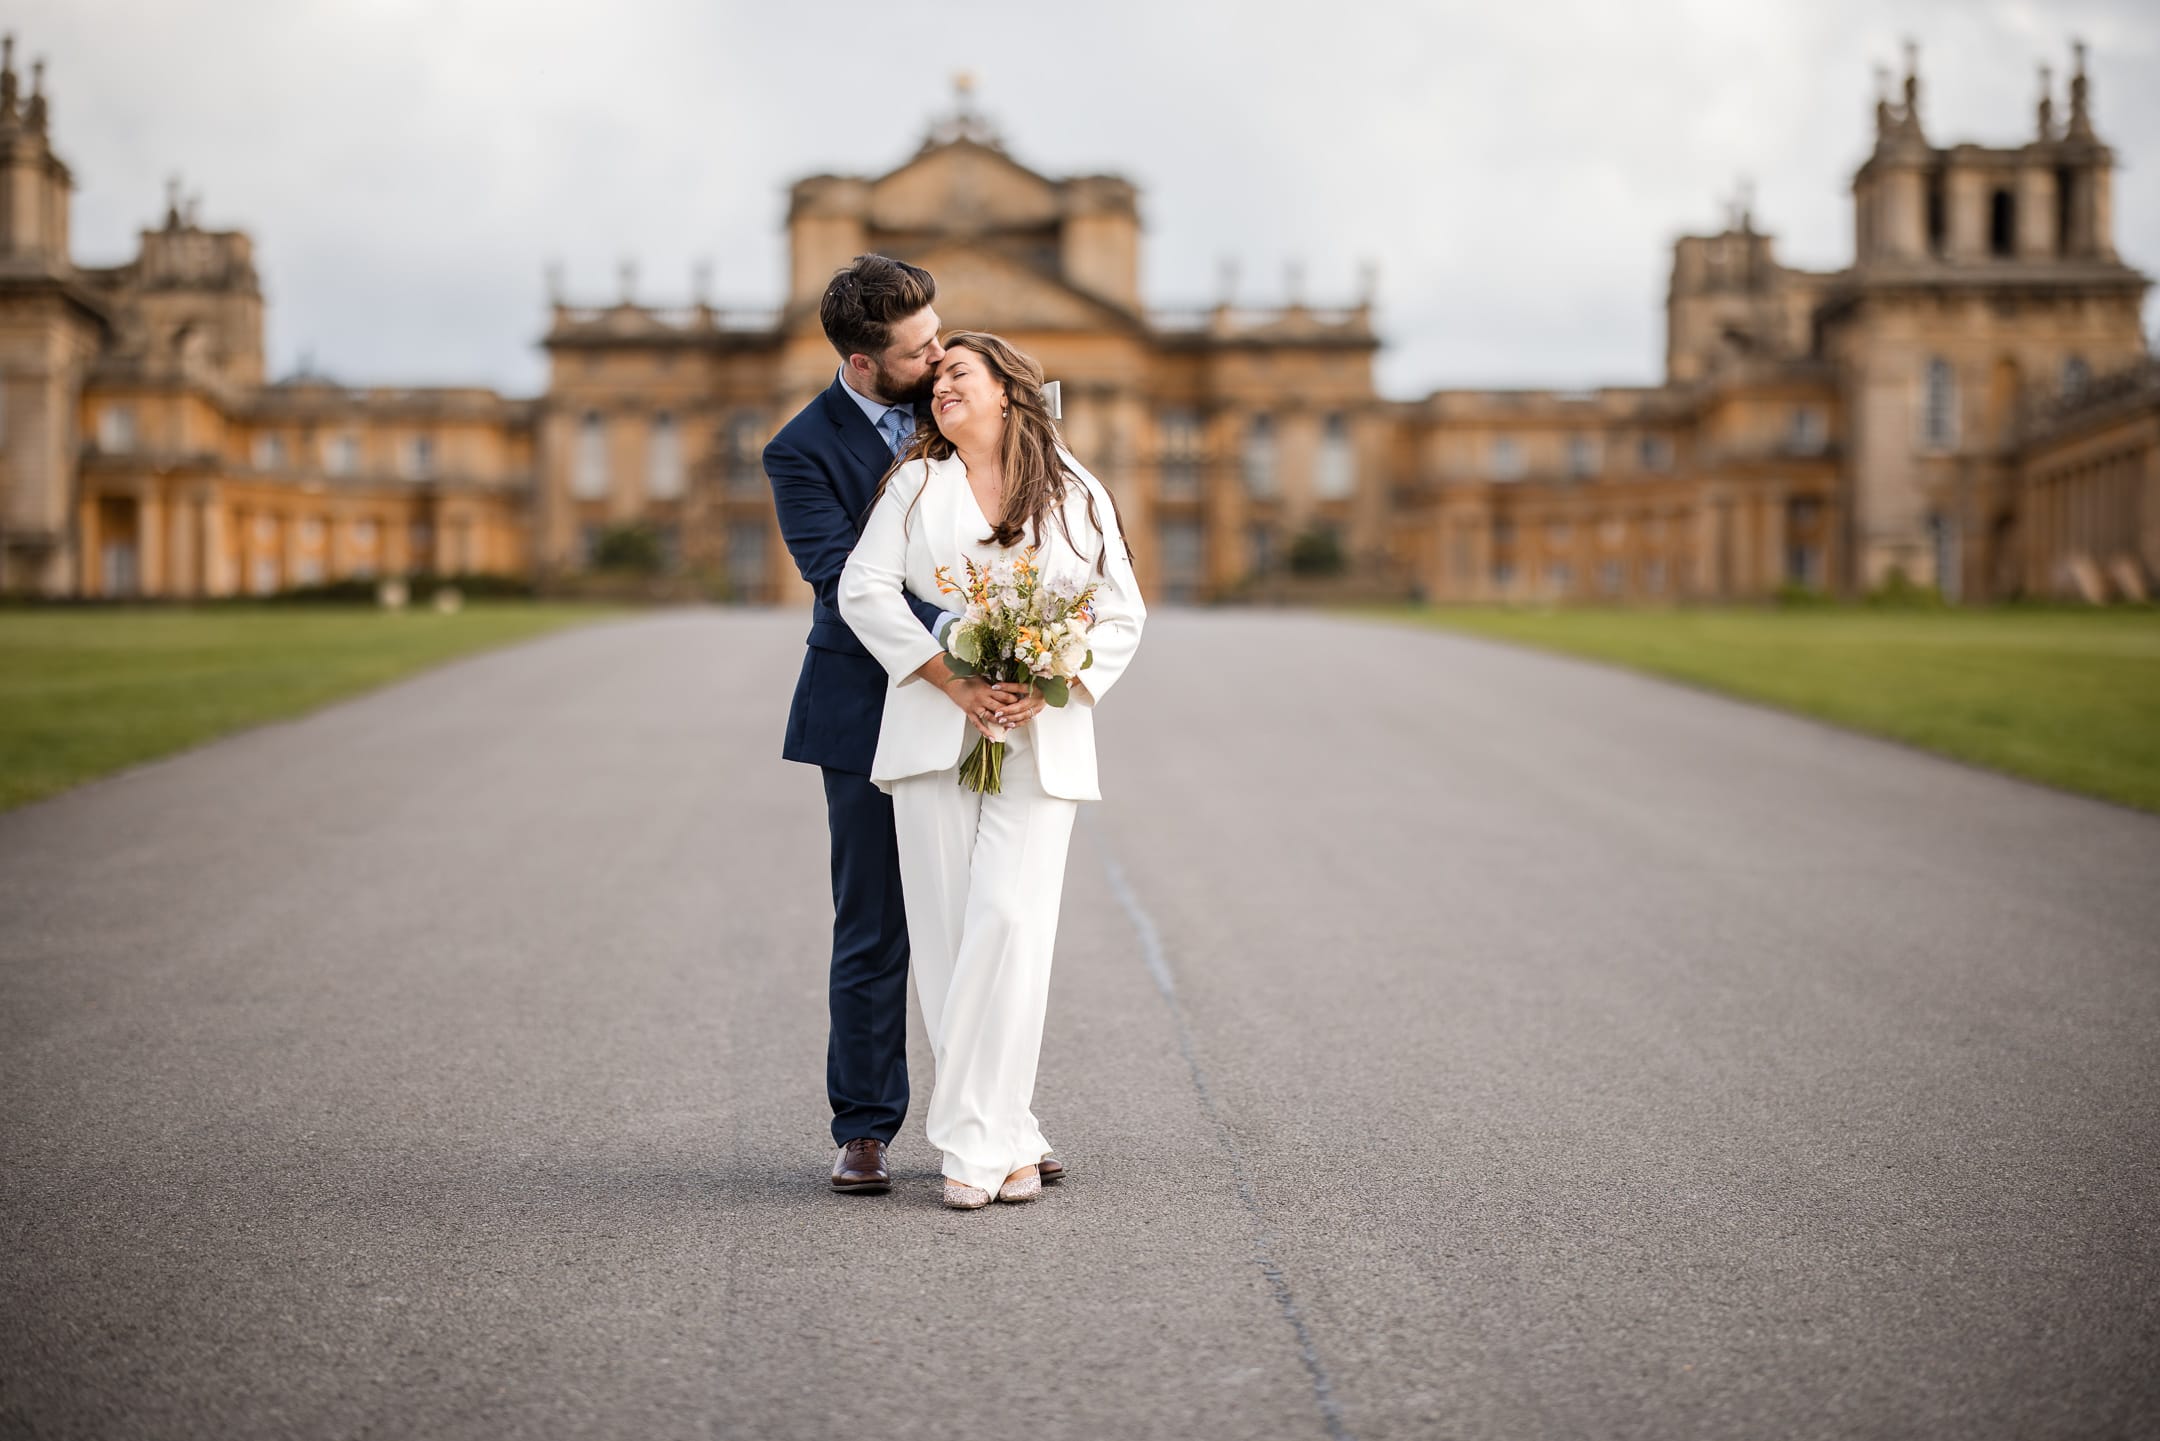 Bride and Groom portrait at Blenheim Palace Woodstock